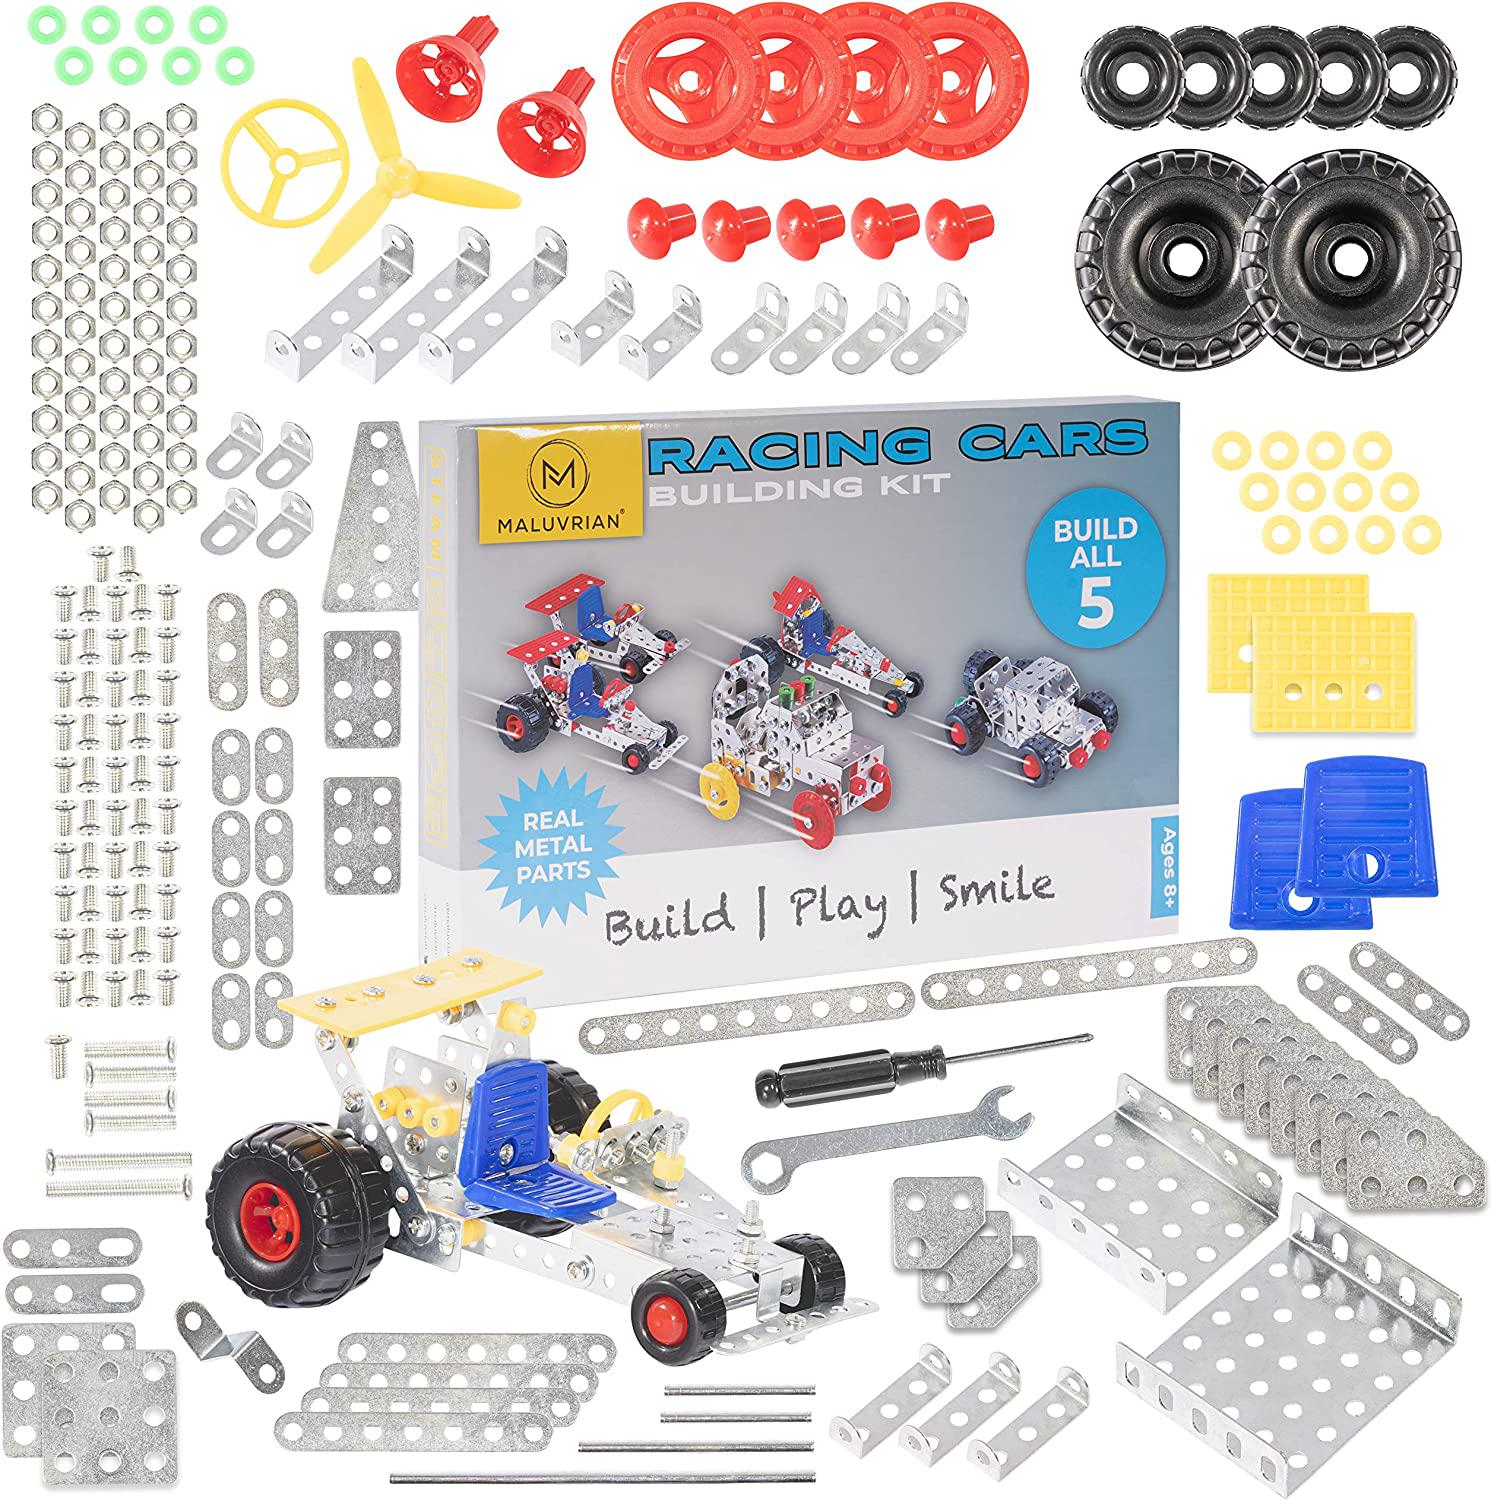 MALUVRIAN, MALUVRIAN 236-Piece Educational Toys STEM Toys Metal Building Sets Building Toys Erector Set Construction Toys for Boys and Girls Toy Metal Erector Sets for Boys Age 8-12 yrs Old